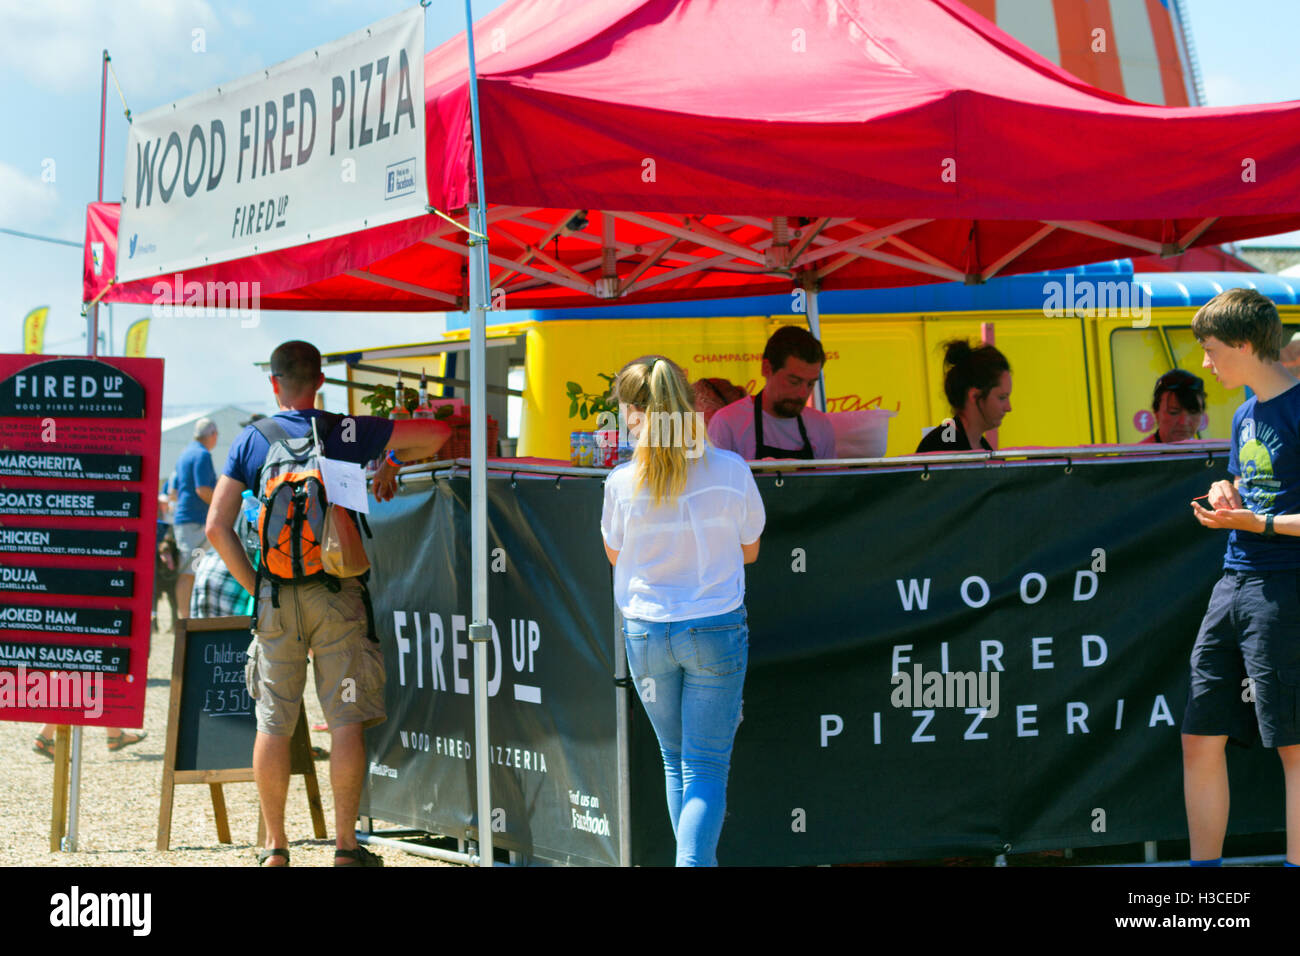 Wood fired pizzaria food stall, annual music festival, Jimmy's Farm, Ipswich, Suffolk, UK, 2016 Stock Photo